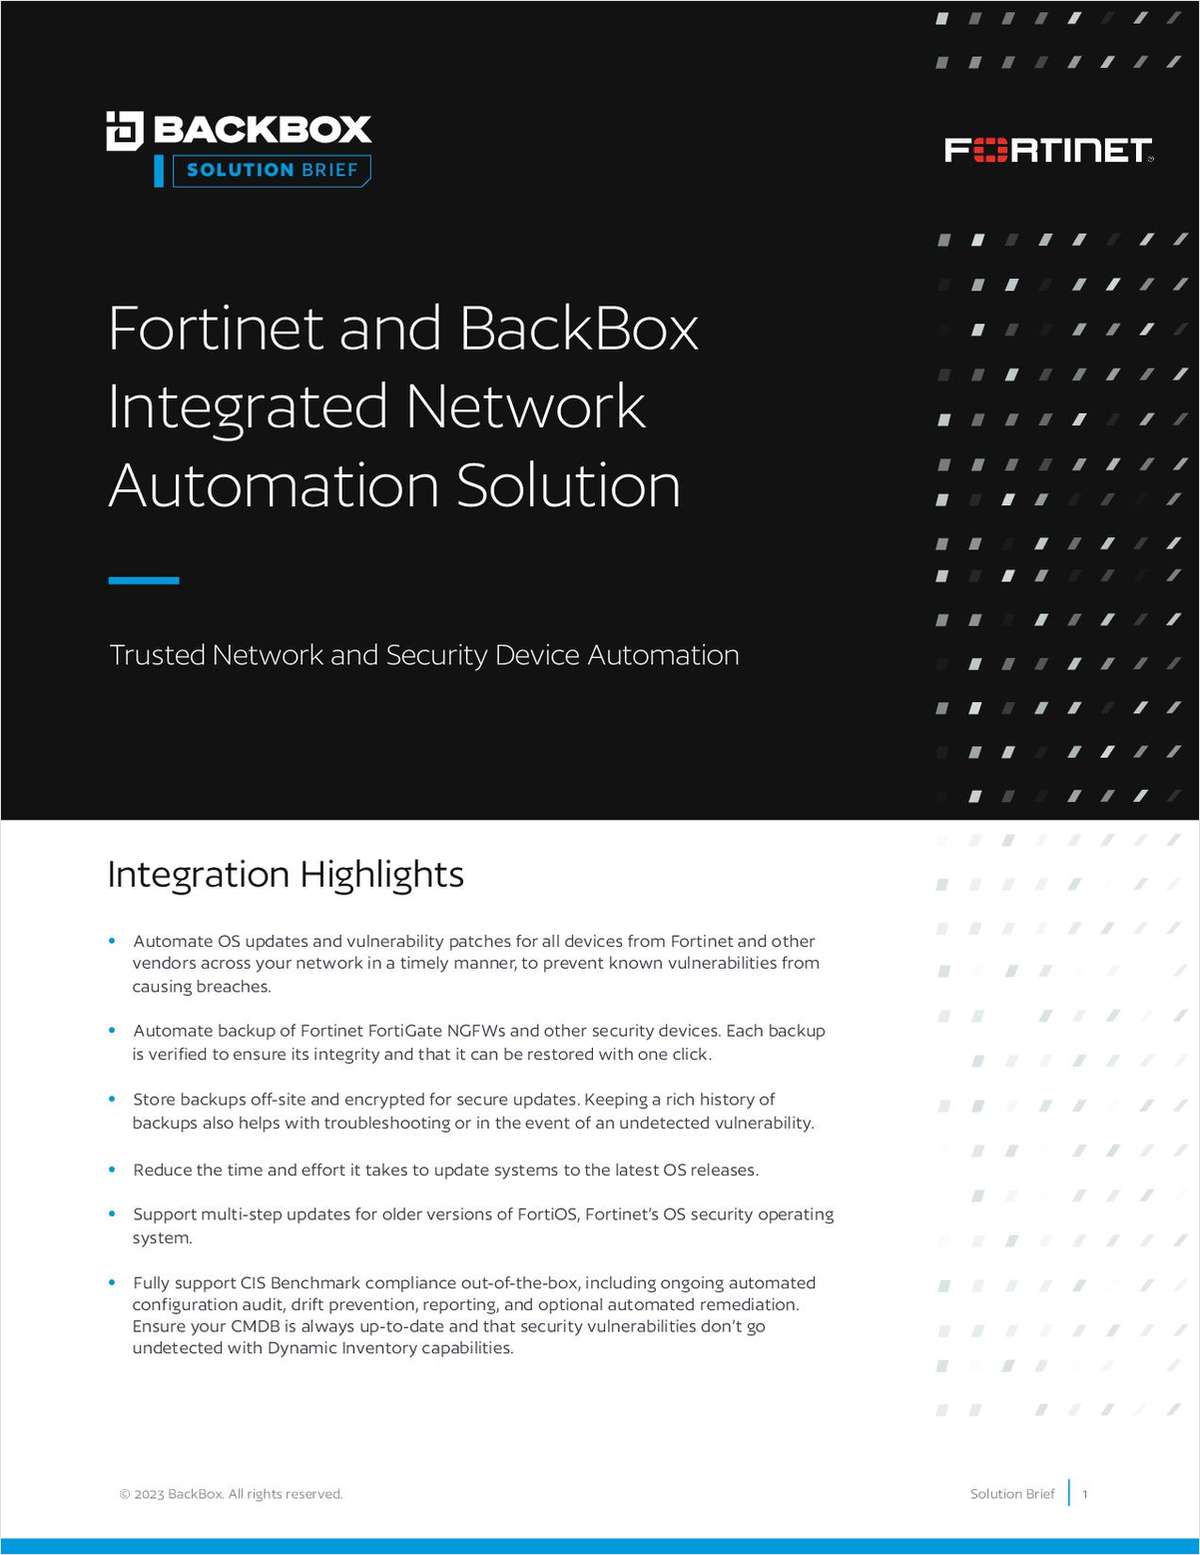 Fortinet and BackBox Integrated Network Automation Solution